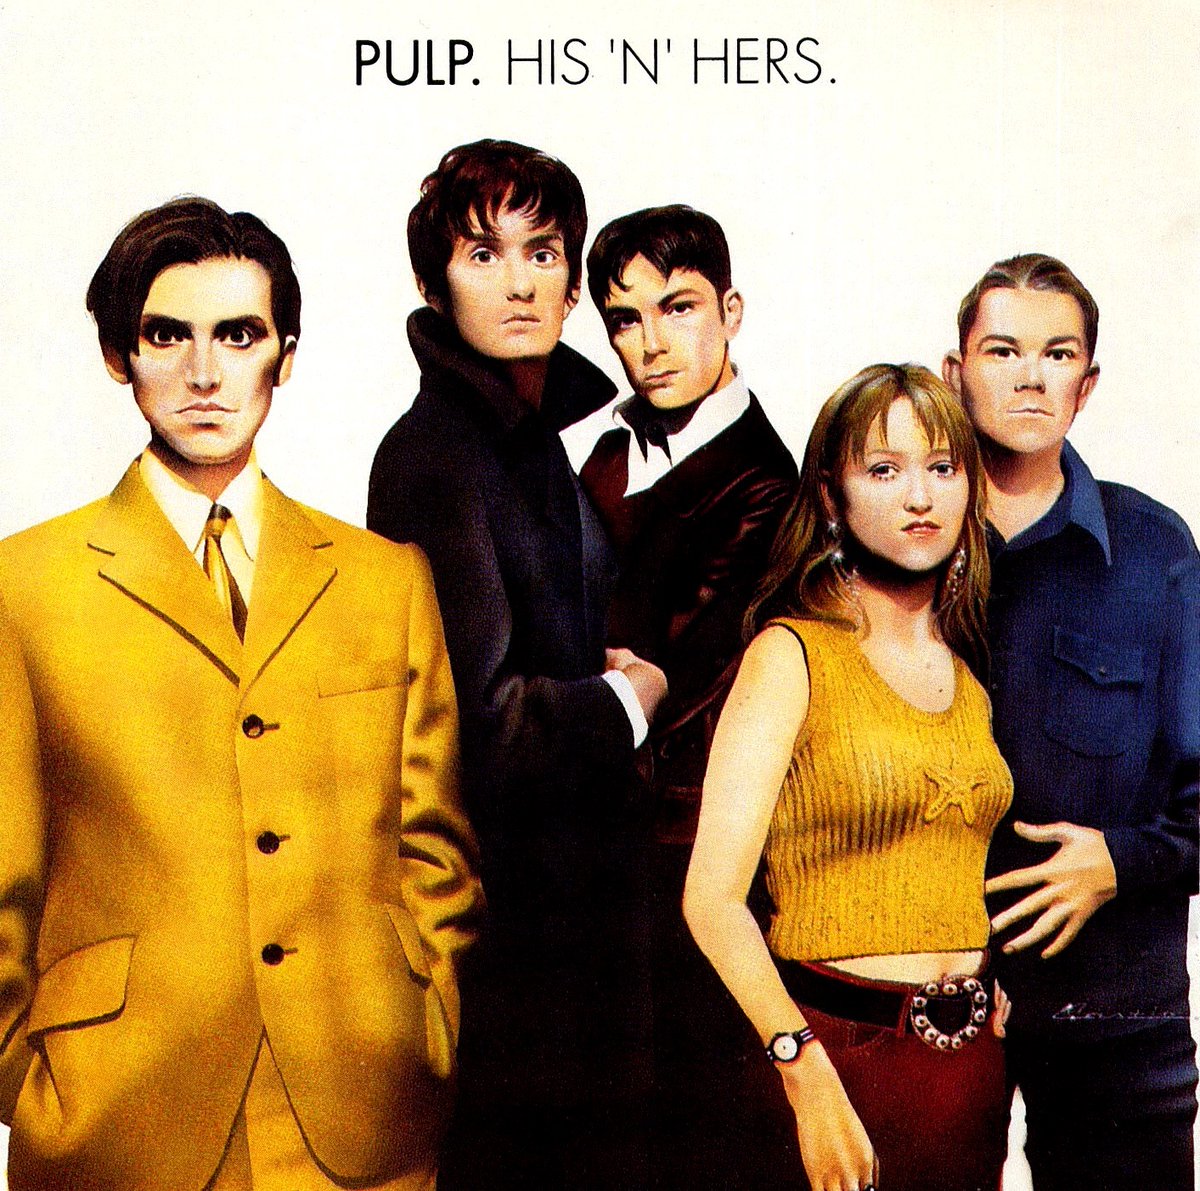 Today is the 30th anniversary of the release of His ‘n’ Hers, the fourth studio album by Pulp. After years in the indie wilderness the album provided the group with their much deserved breakthrough @welovepulp @islandrecordsuk @Britpopmemories @britpopnews